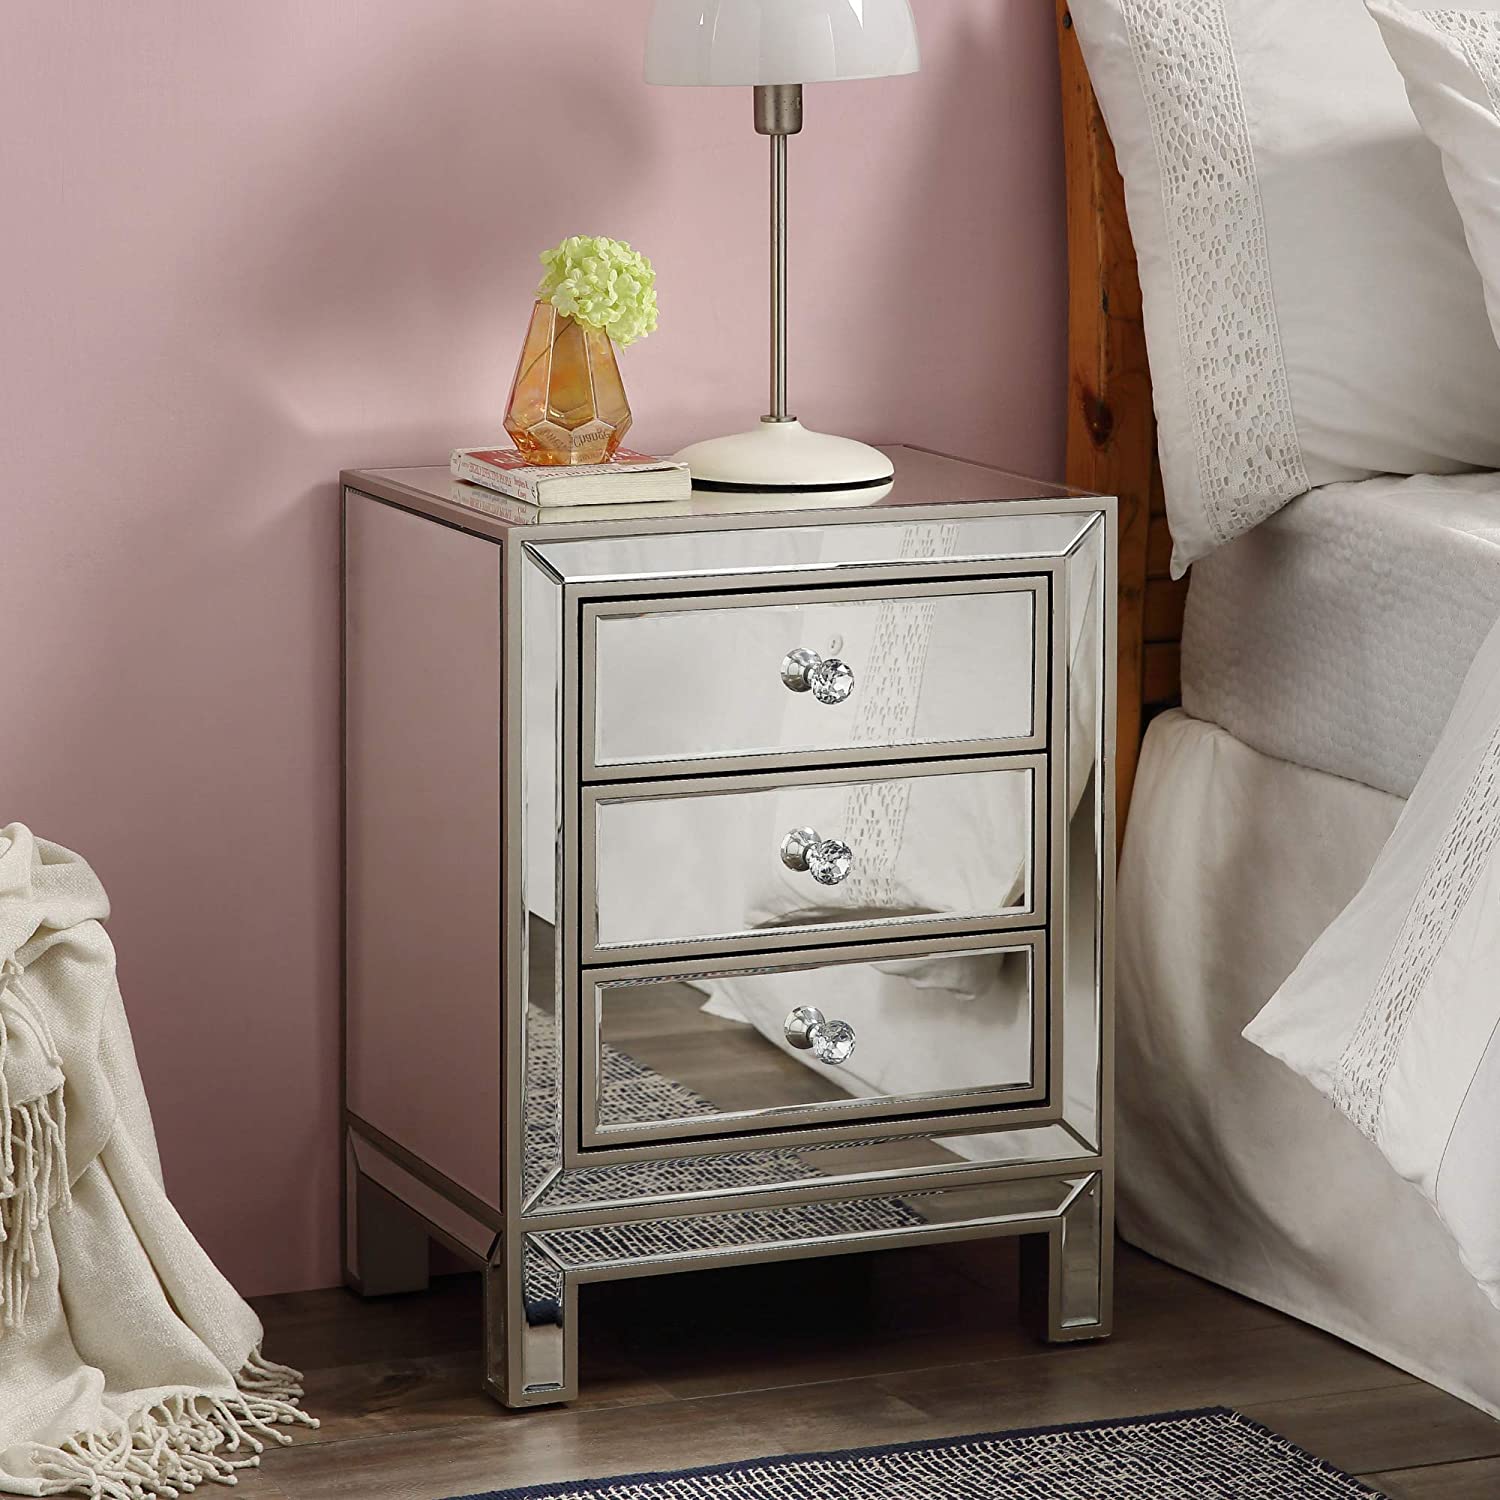 A Mirror Nightstand For Unmatched Elegance